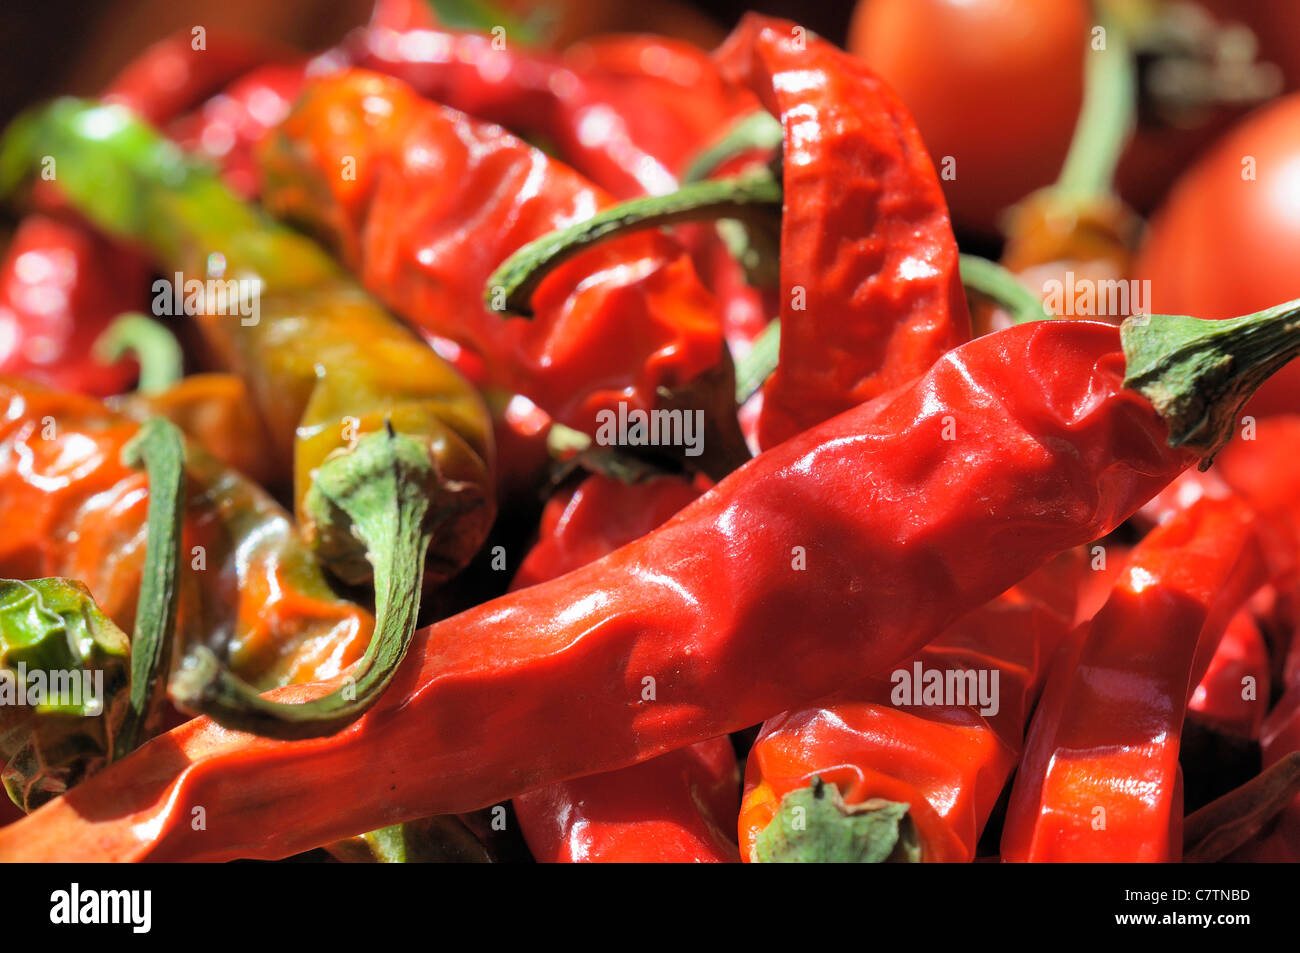 Macro shots of red Chili Peppers. Stock Photo